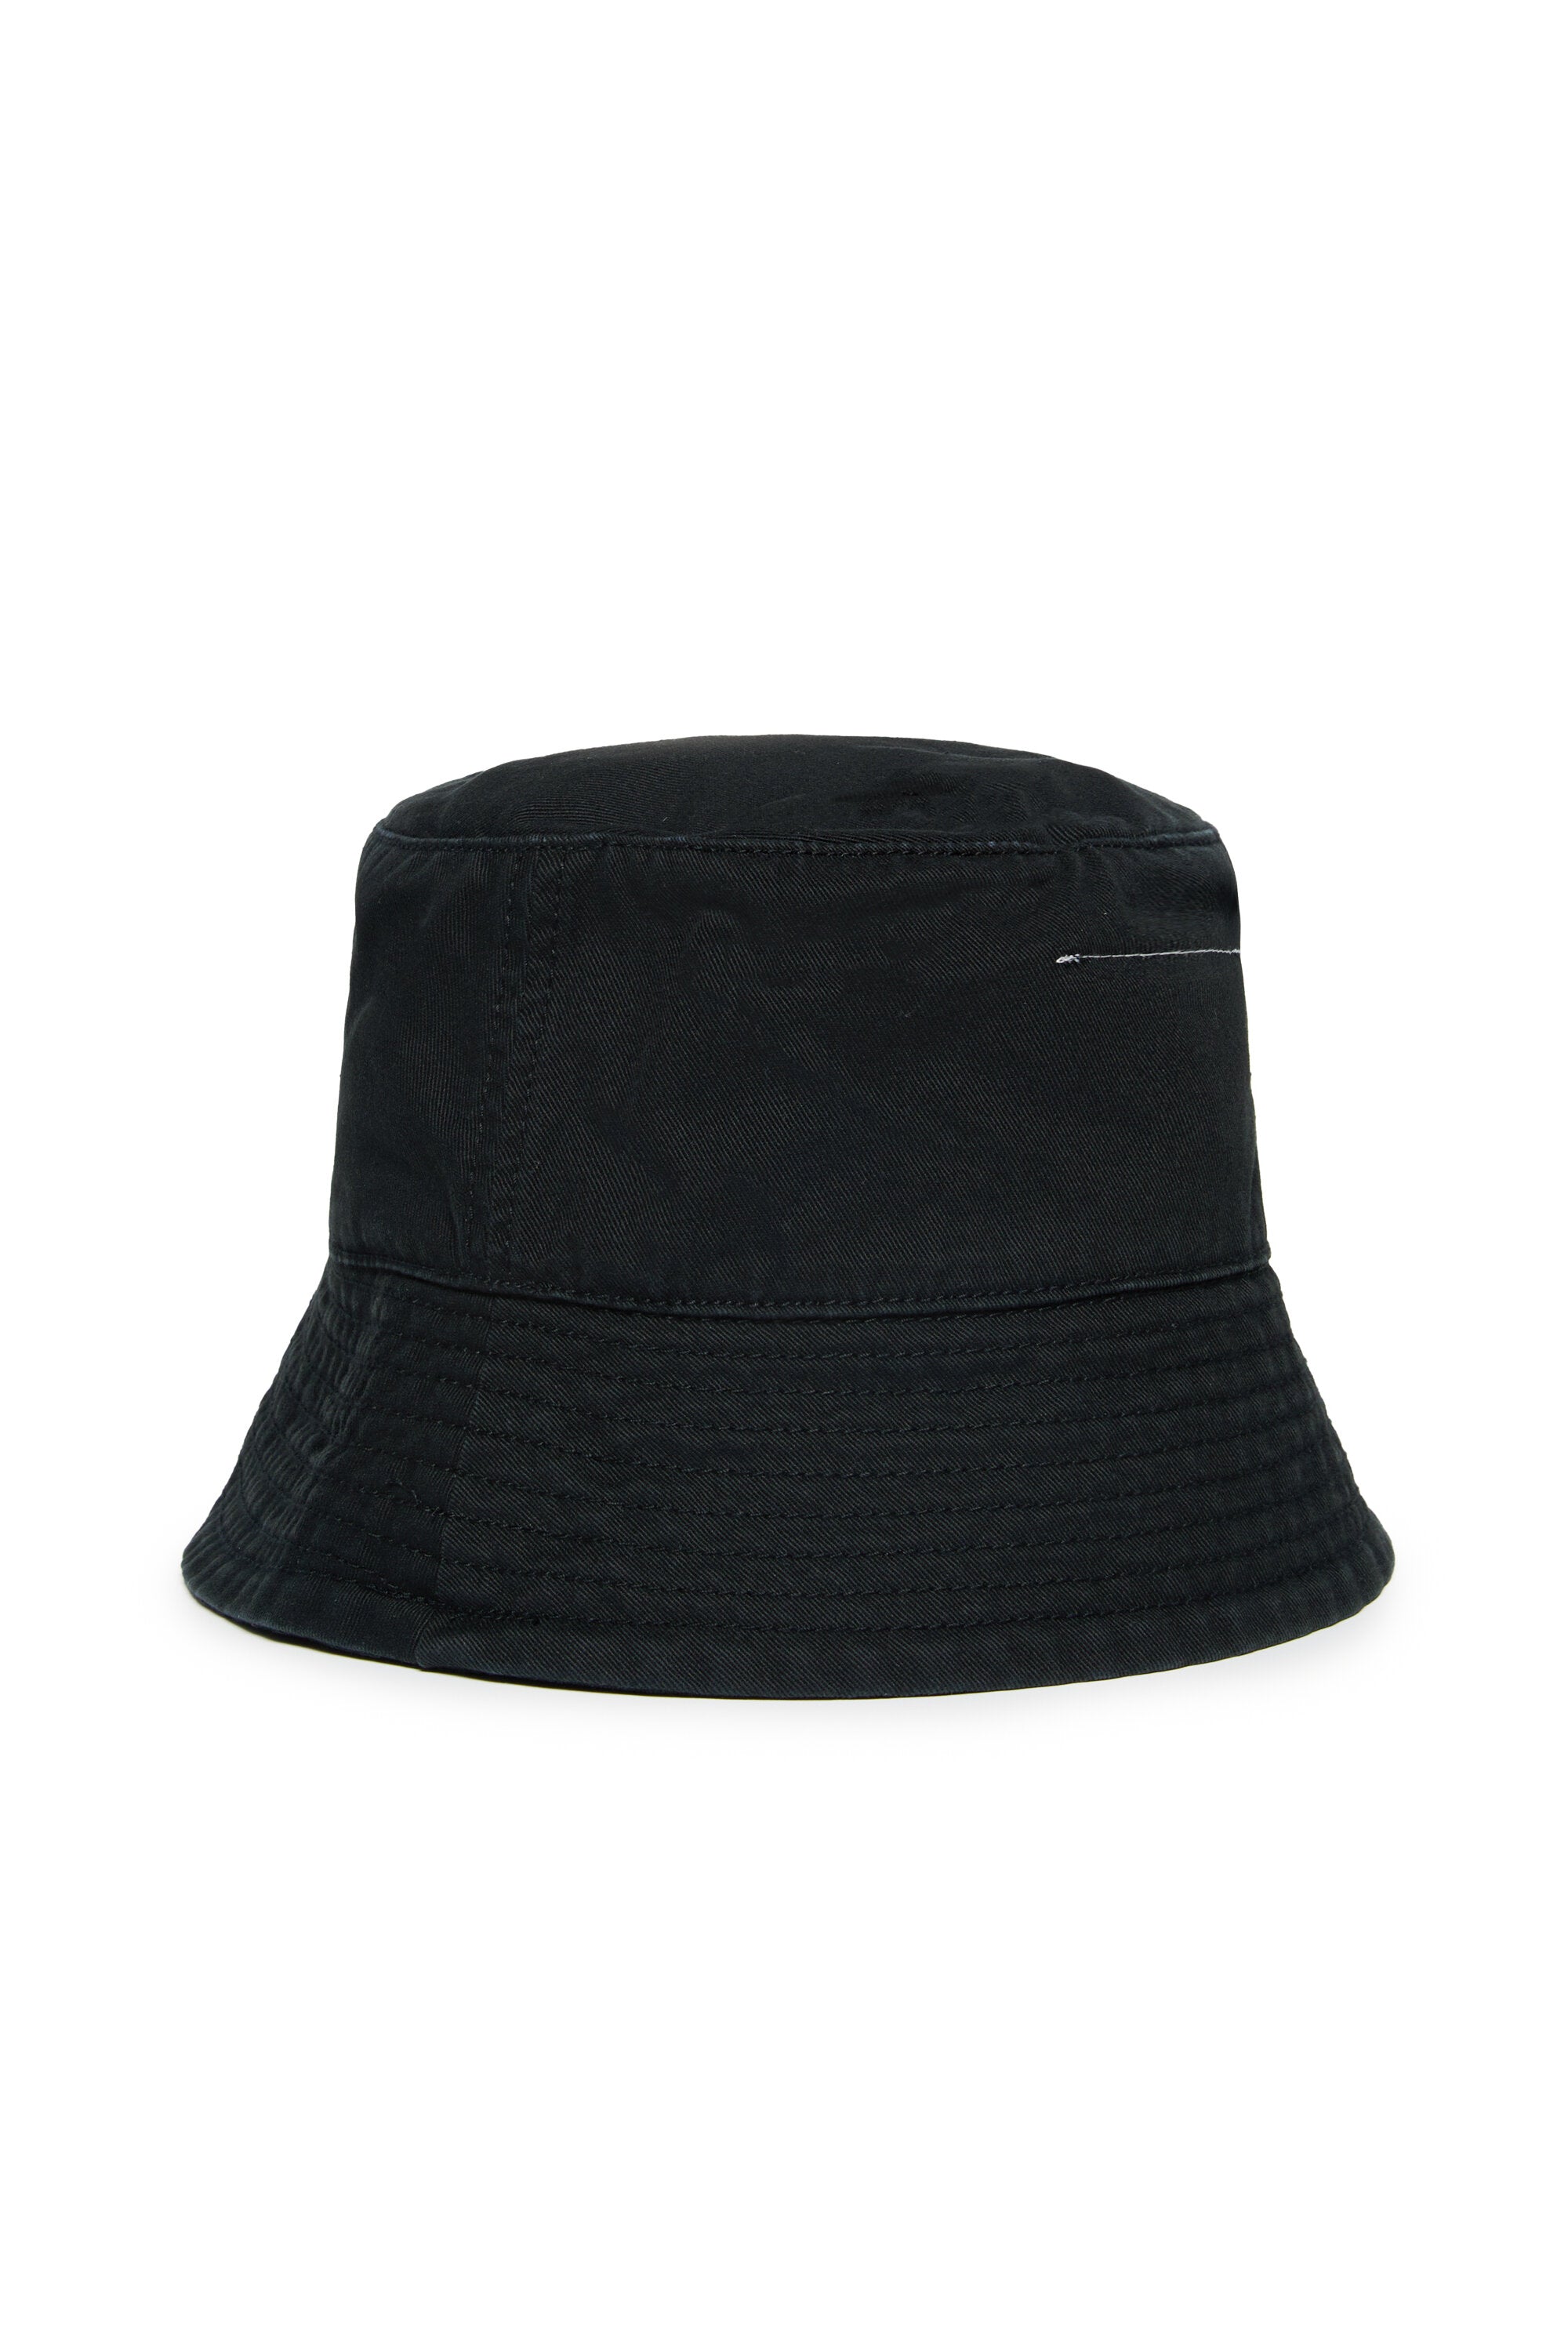 Fisherman hat with MM6 logo